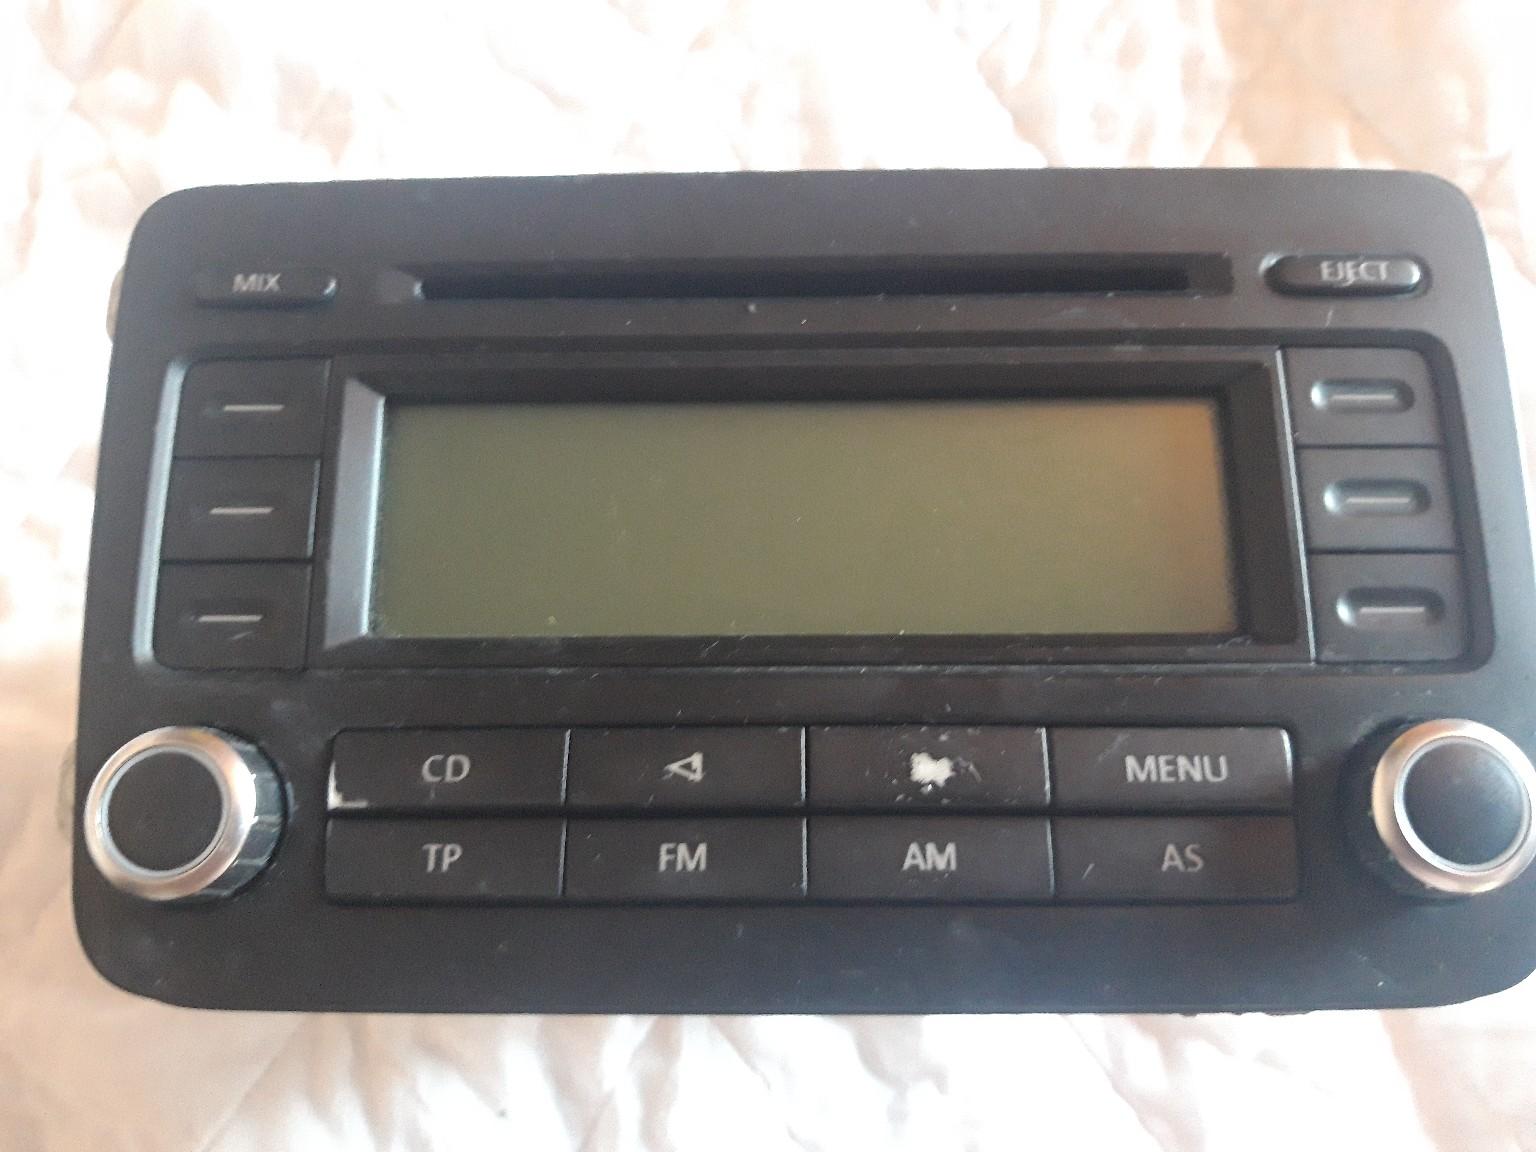 vw stereo with code in LS10 Leeds for £20.00 for sale Shpock